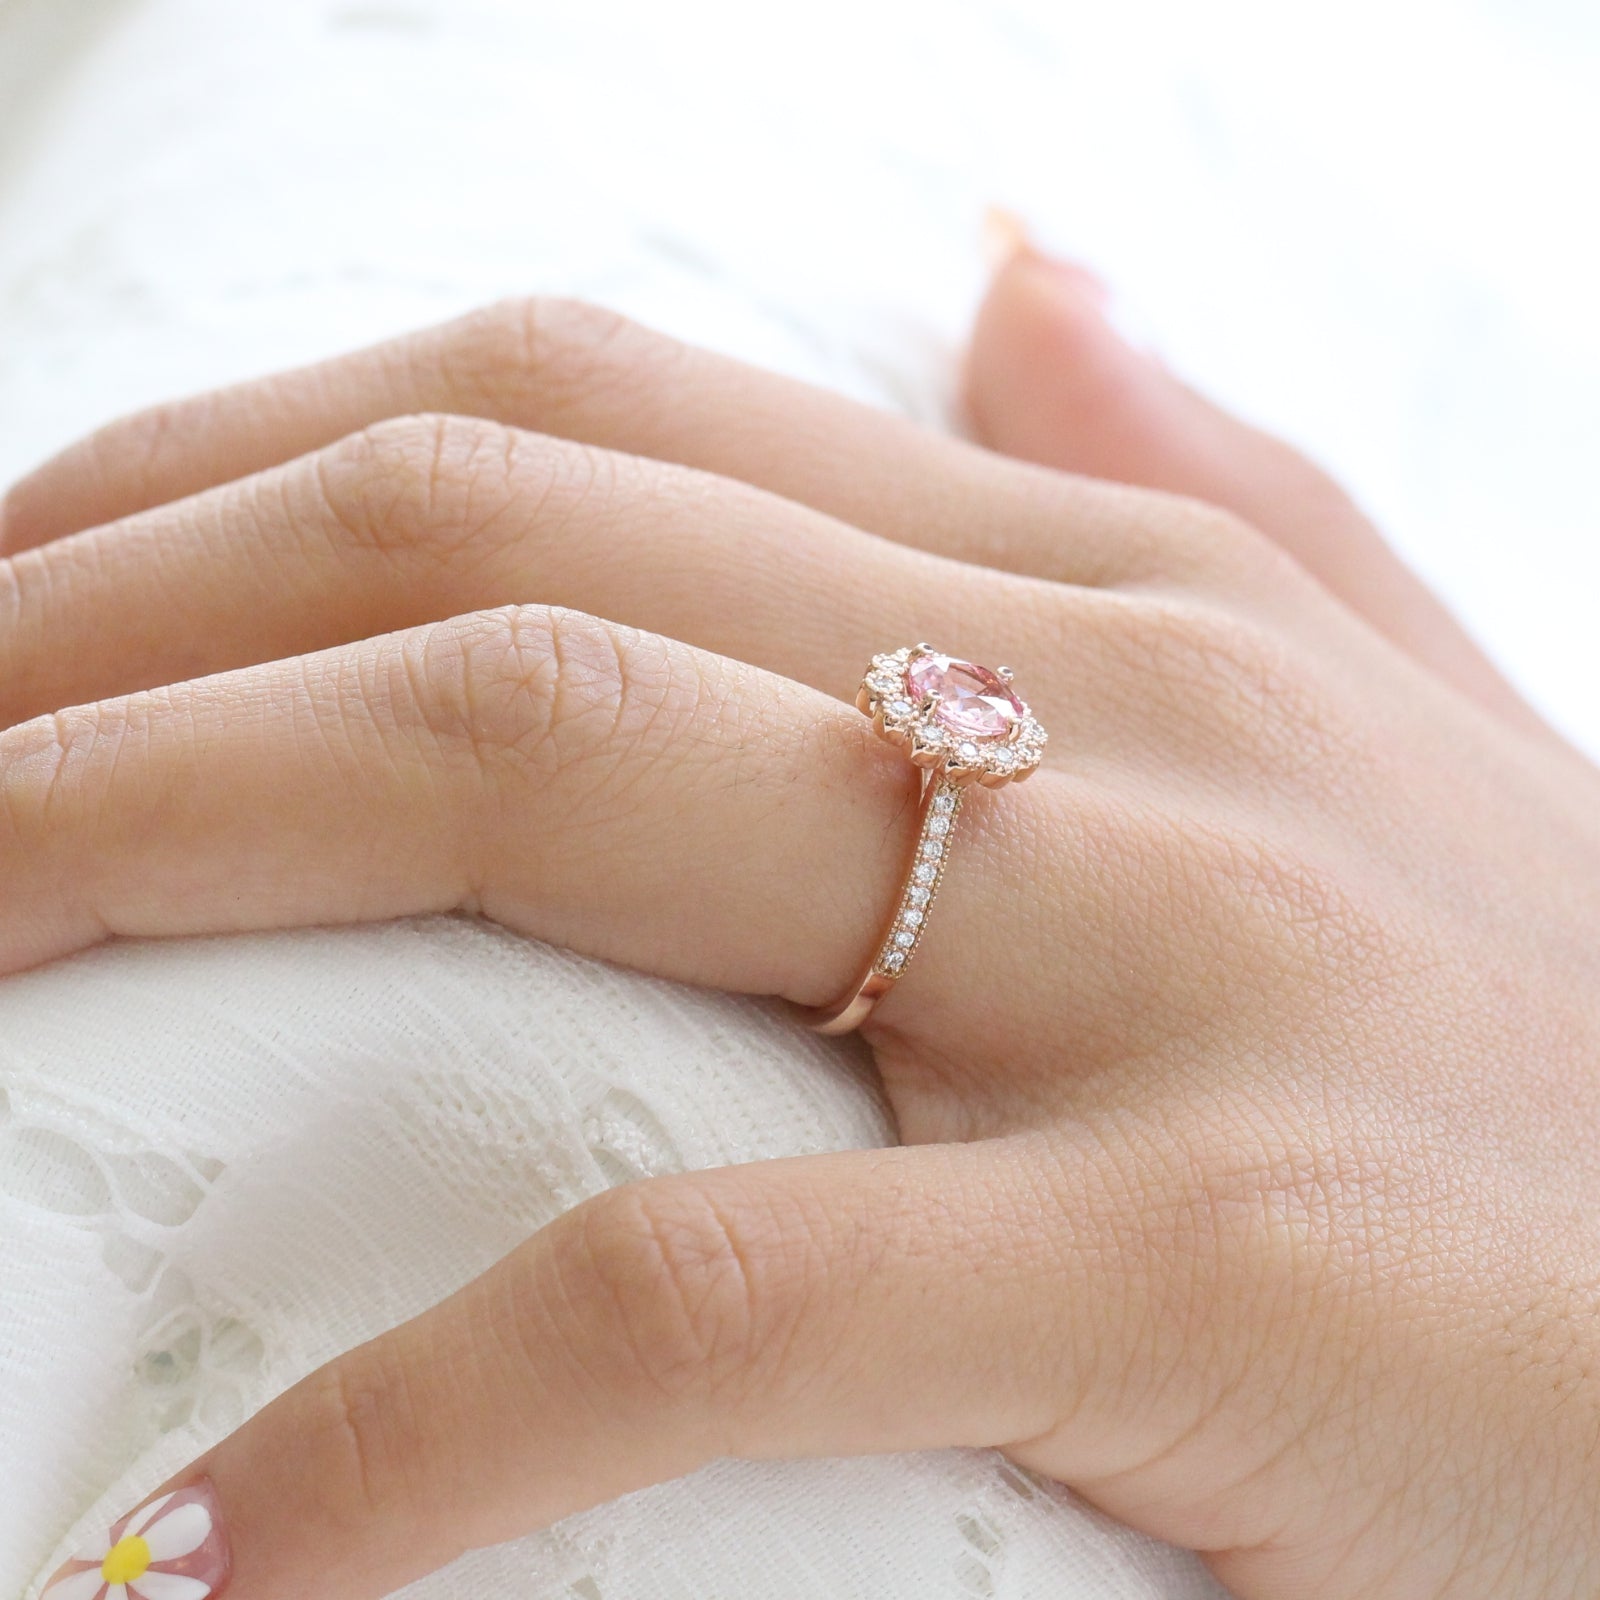 Oval Peach Sapphire Engagement Ring in Rose Gold Halo Diamond Band by La More Design Jewelry